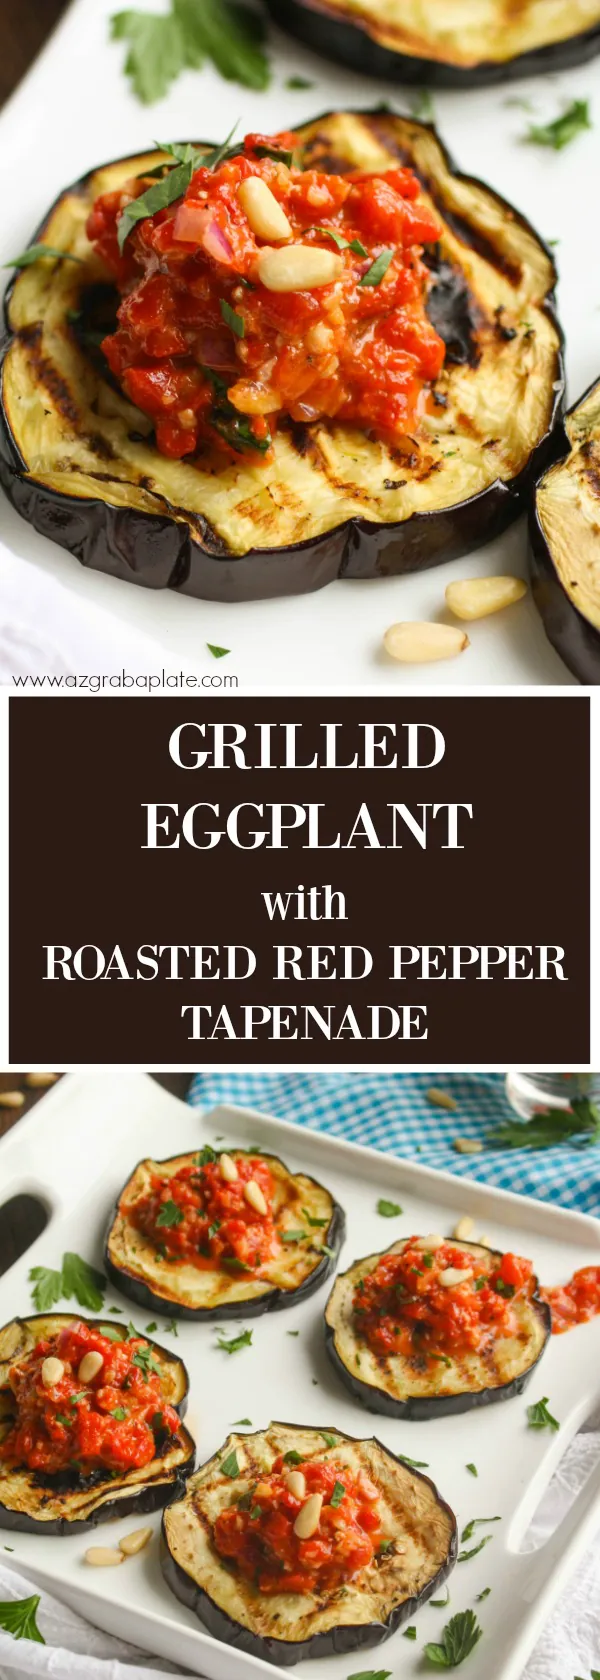 Grilled Eggplant with Roasted Red Pepper Tapenade is a treat for the summer! This is a tasty and easy-to-make dish!